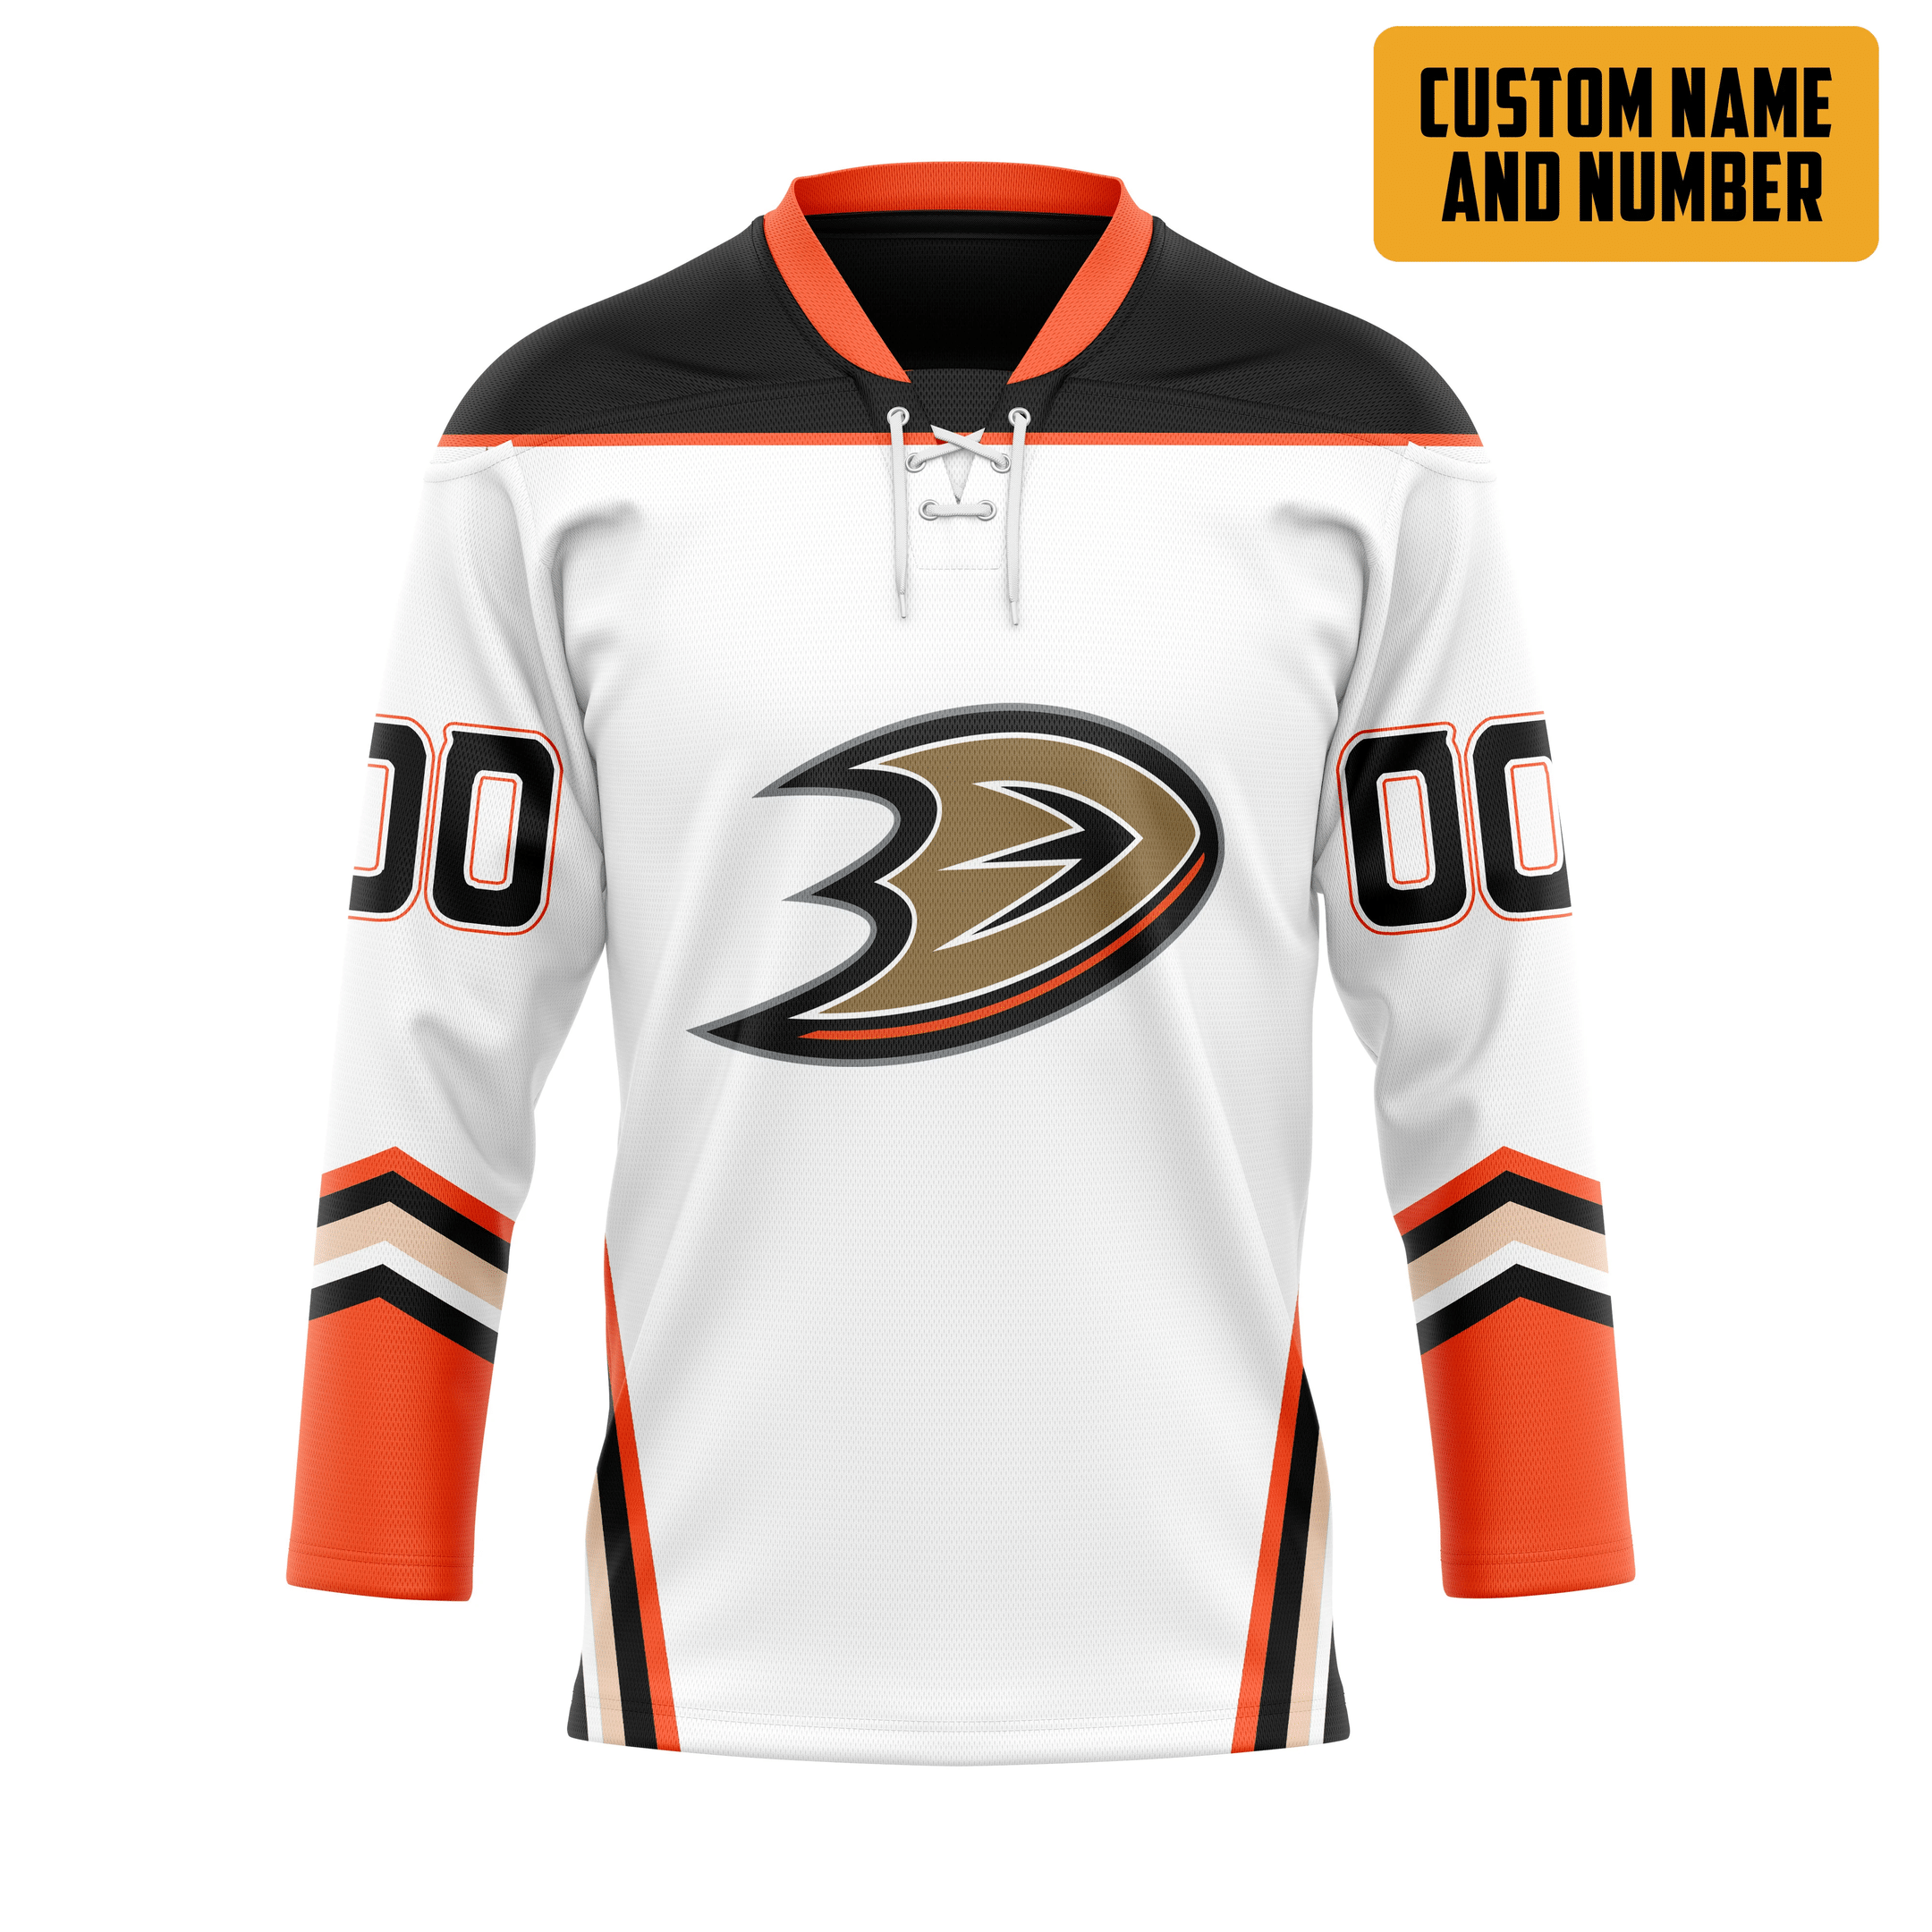 Check out our collection of unique and stylish hockey jerseys from all over the world 80